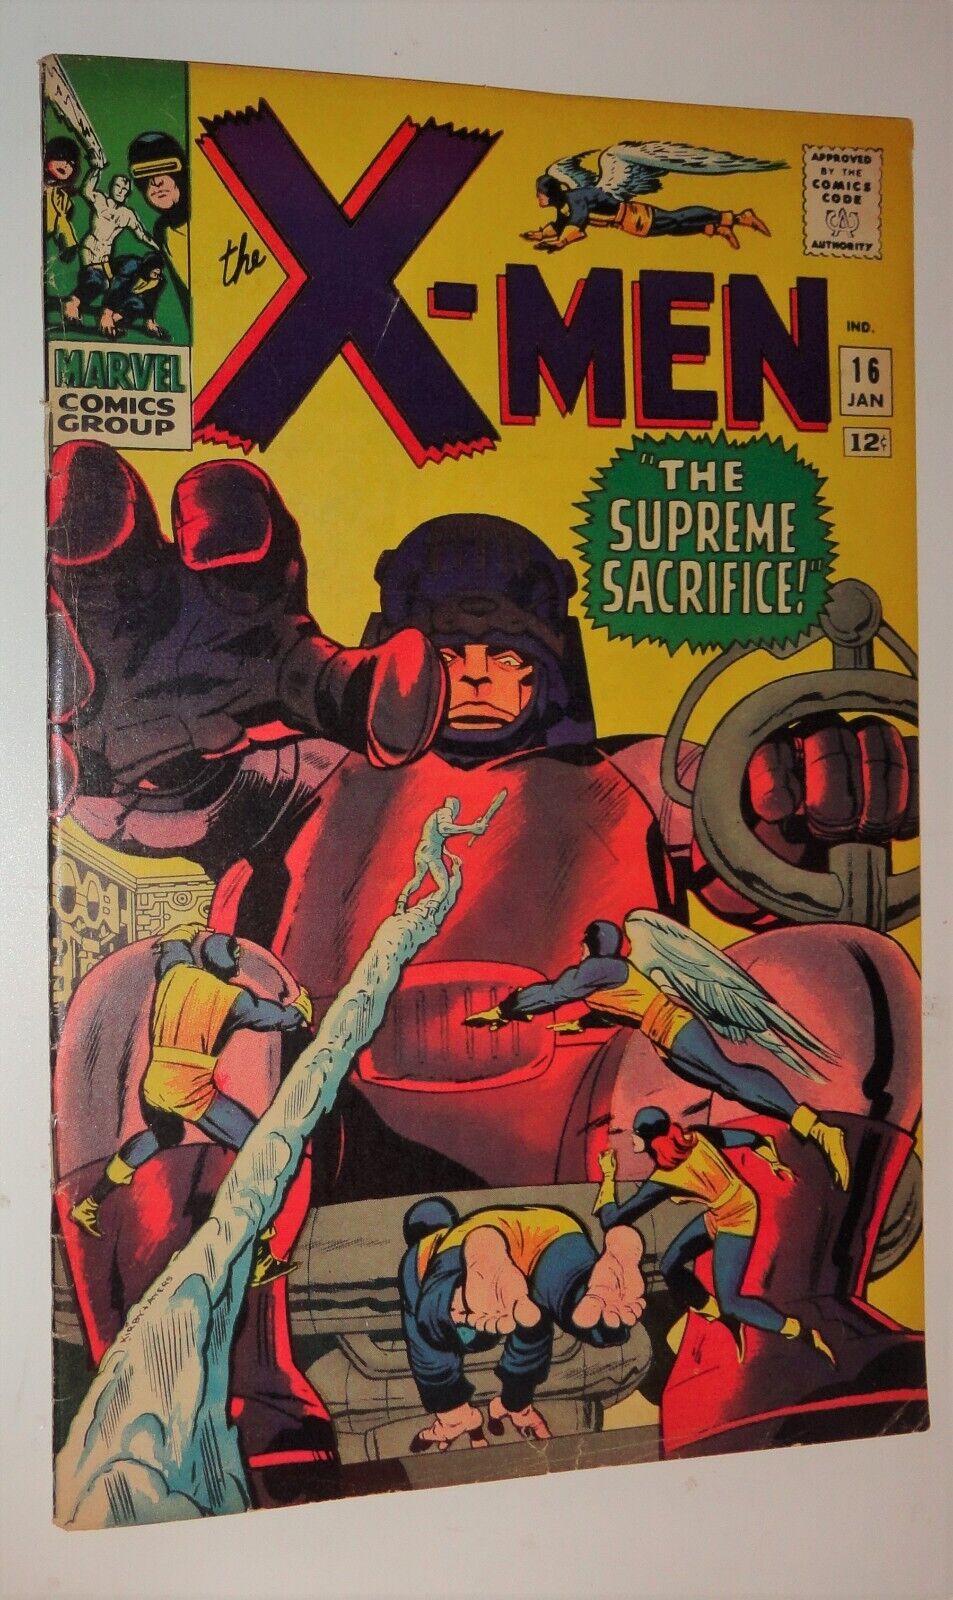 X-MEN #16 SENTINEL SUPREME QAULIFIED VF BRIGHT COPY BUT COUPONS CUT 1966 KIRBY